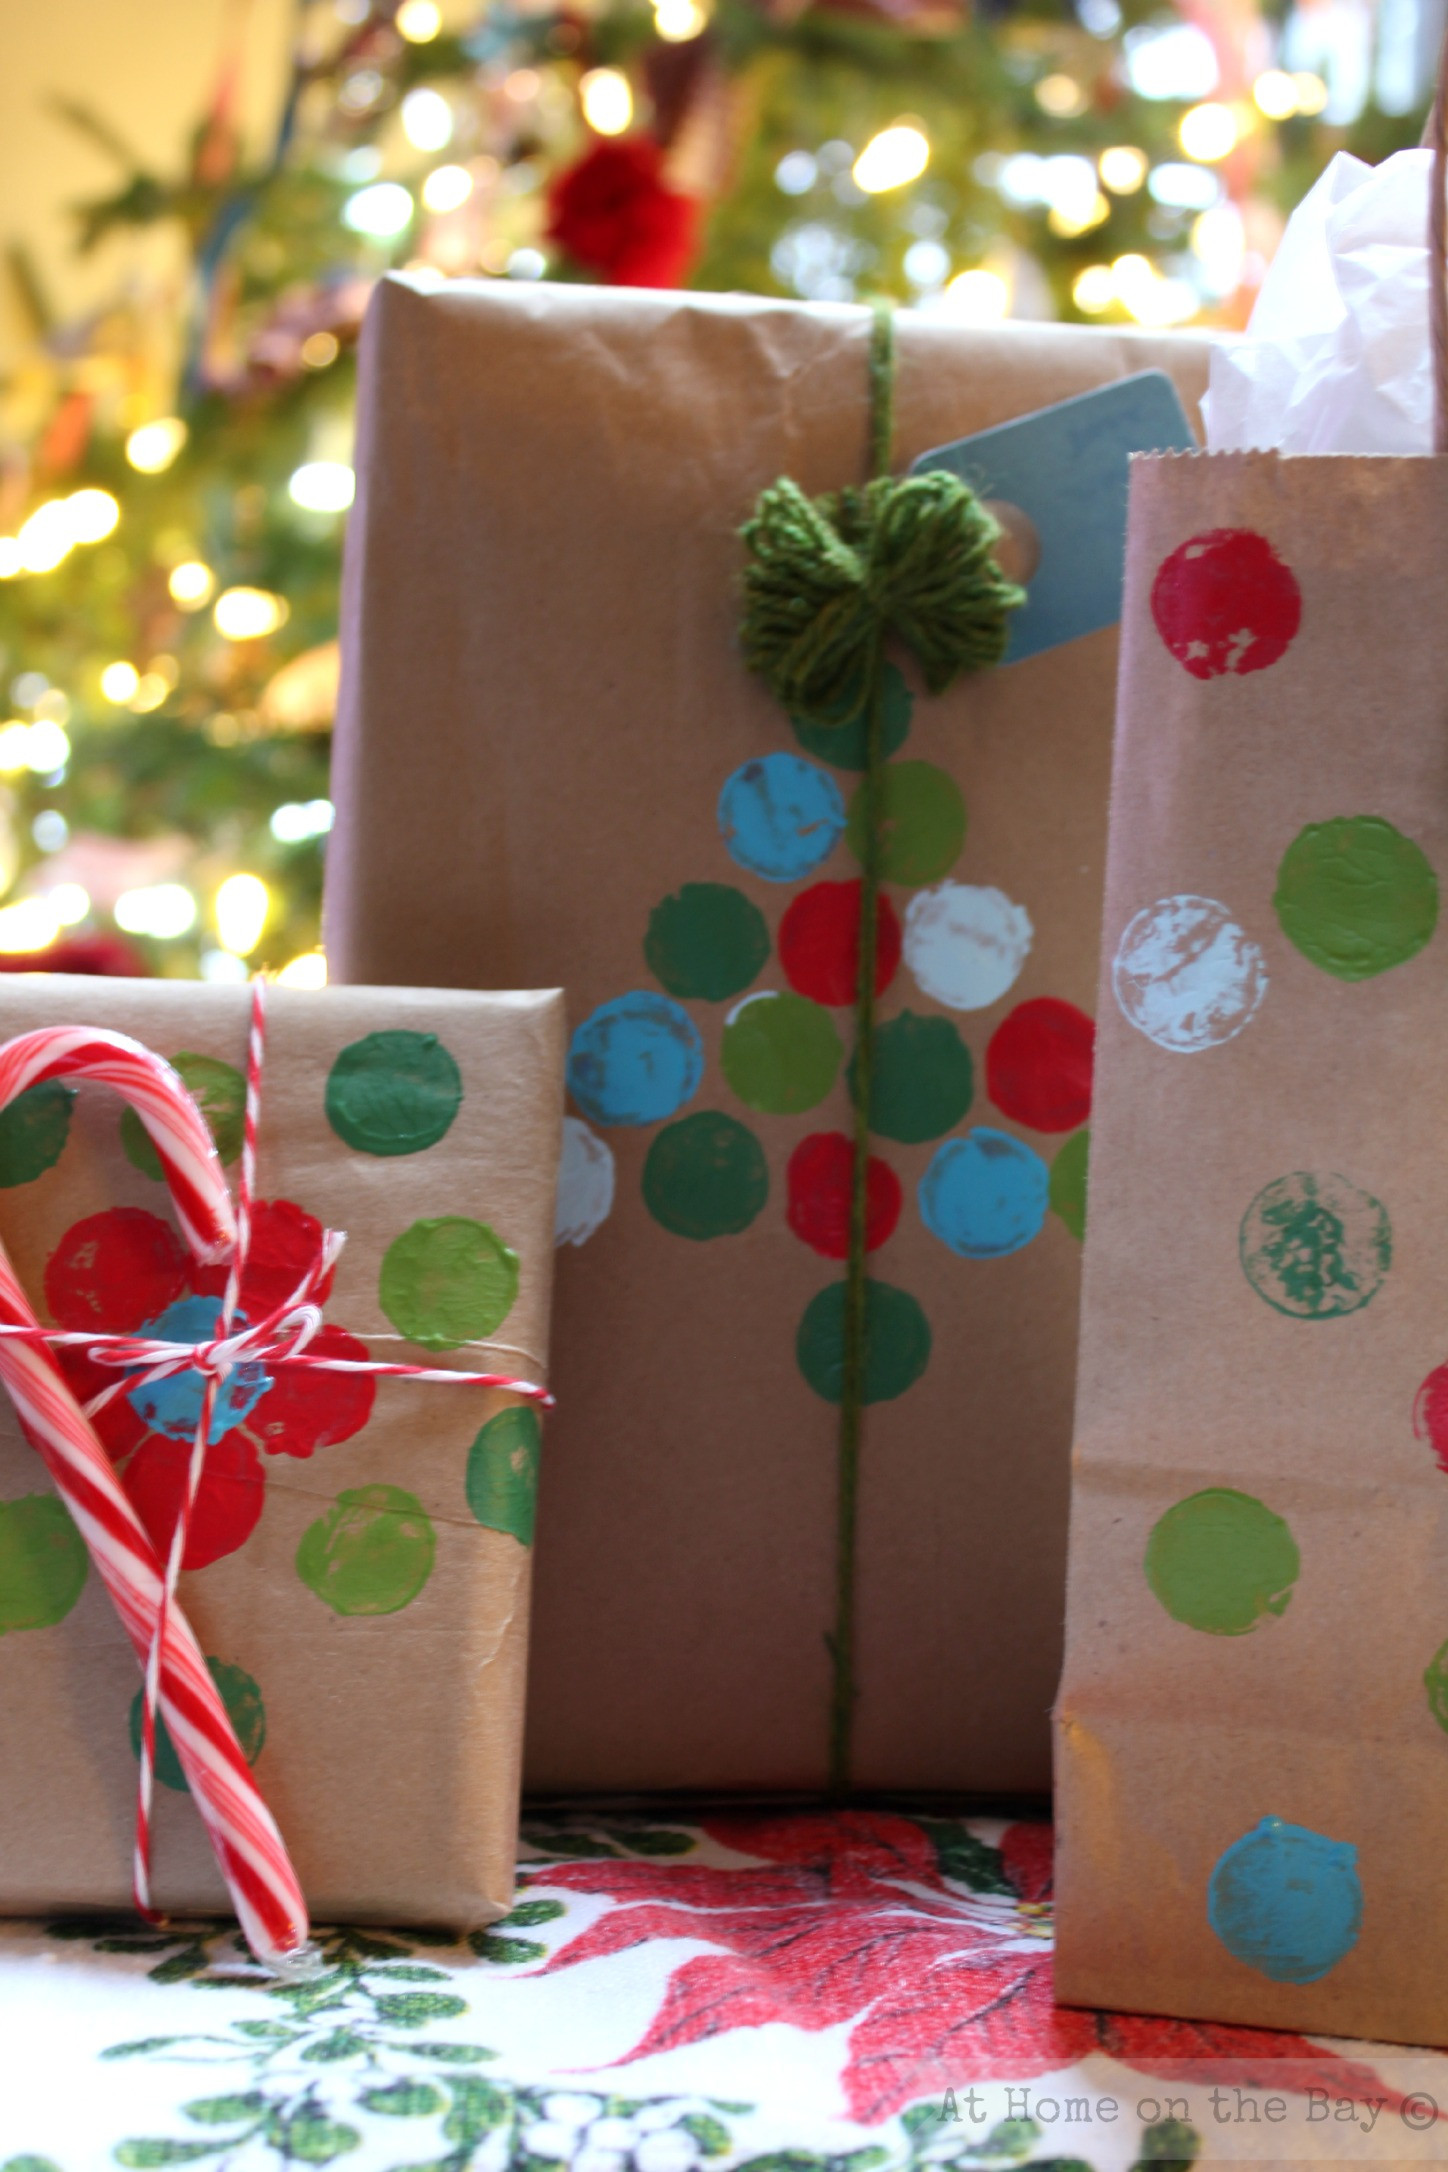 DIY Gift Bags From Wrapping Paper
 Recycled Paper Bag Gift Wrap Ideas